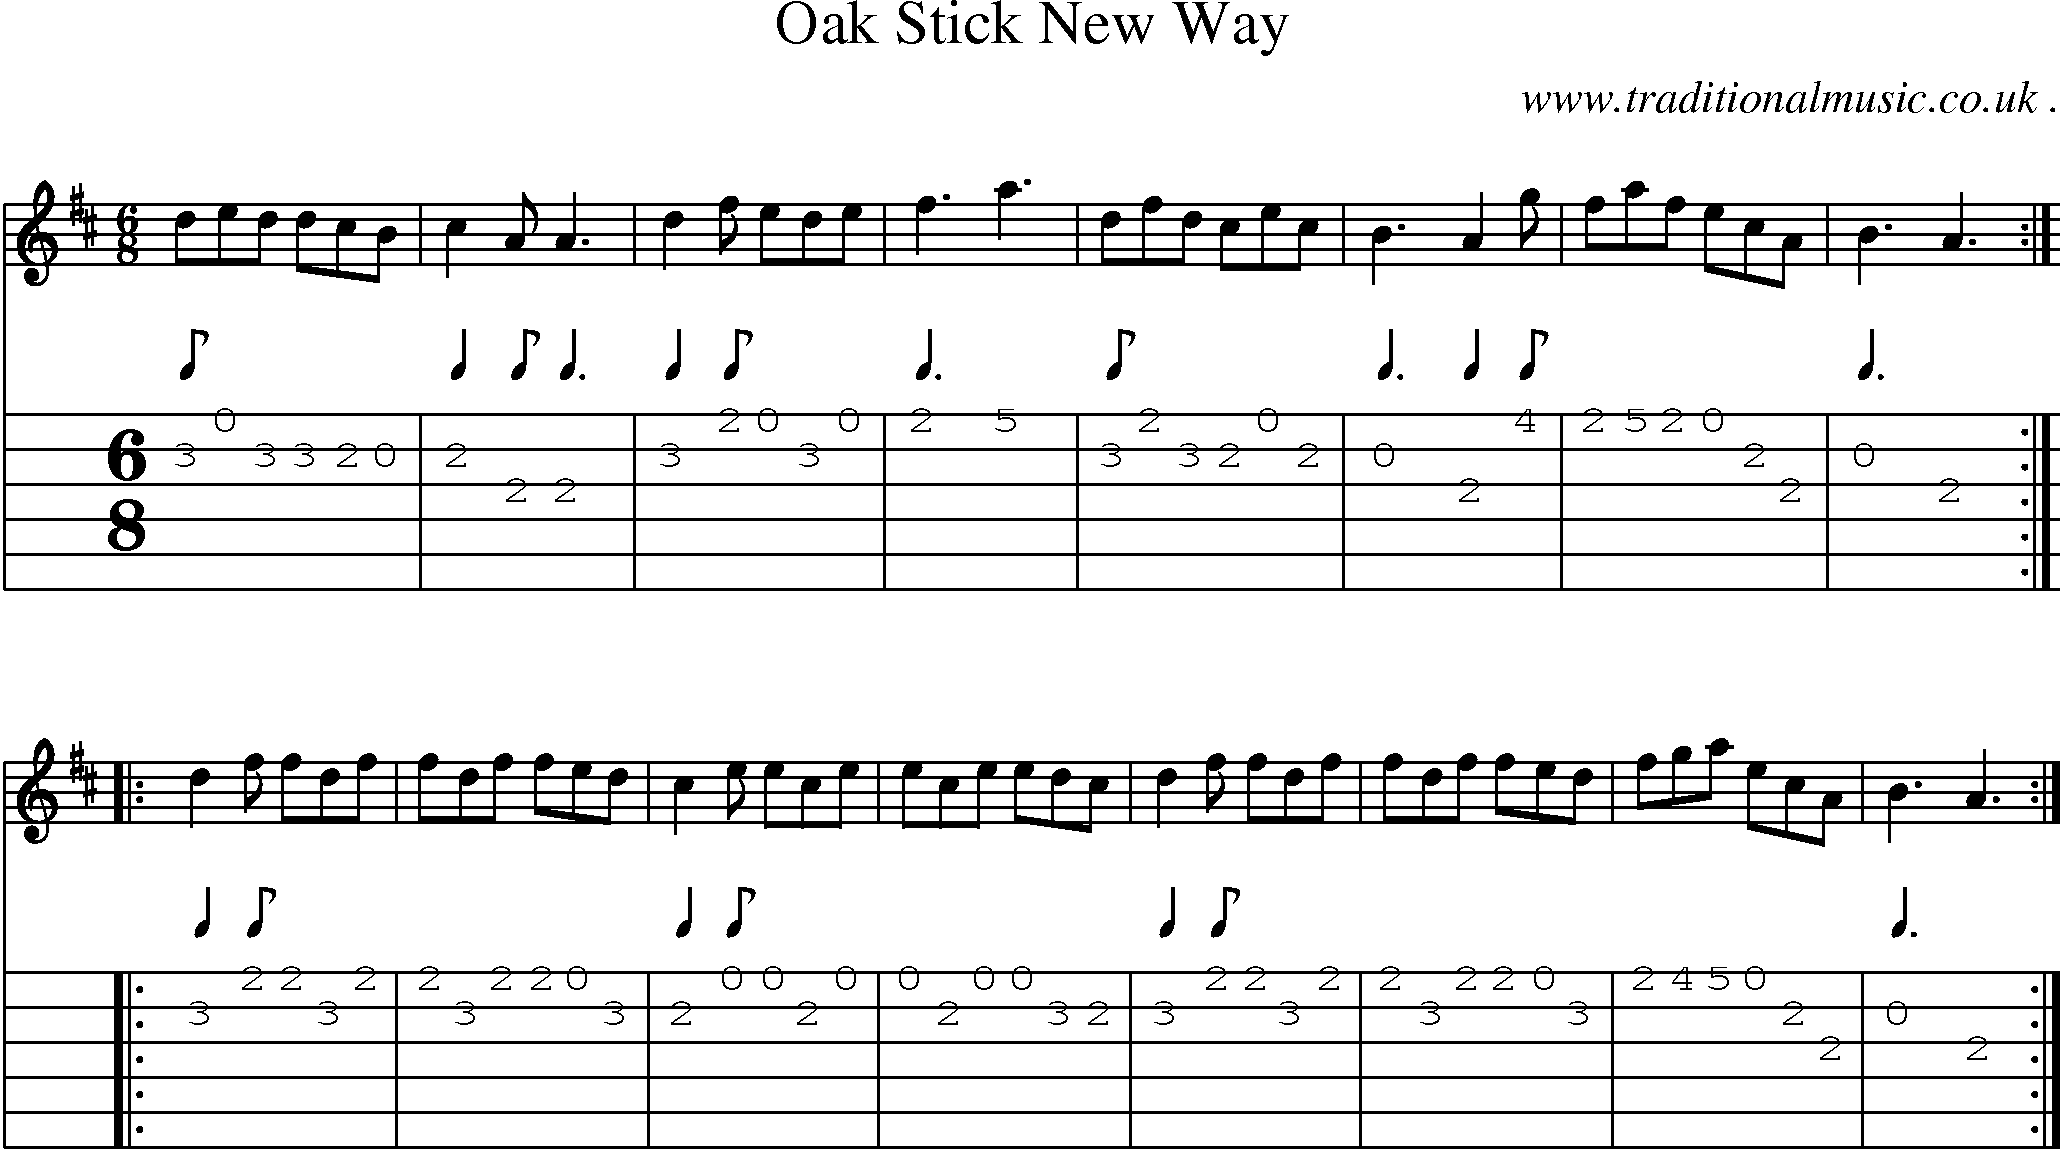 Sheet-Music and Guitar Tabs for Oak Stick New Way